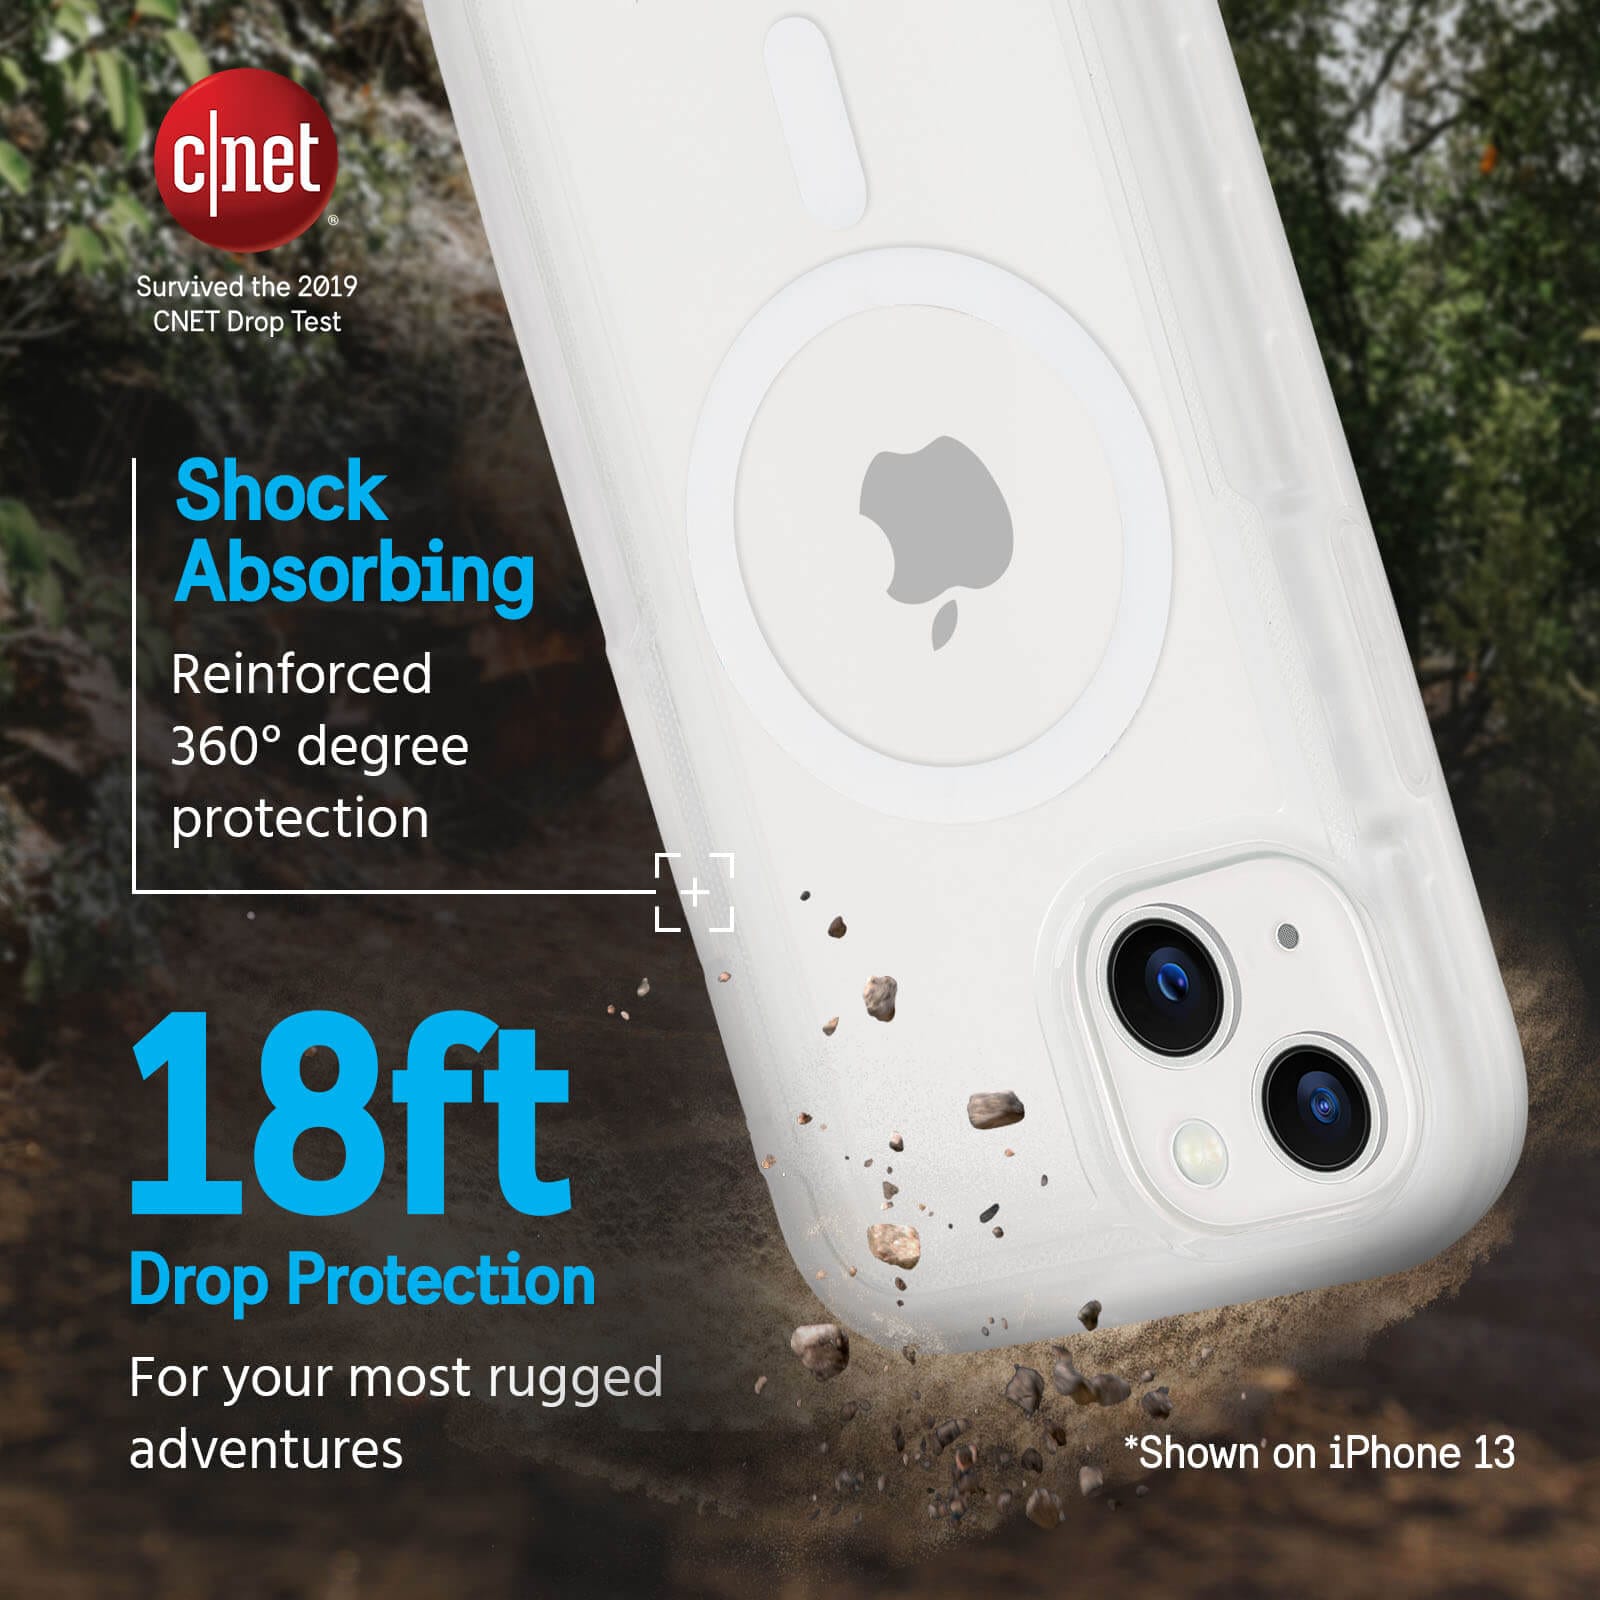 Survived CNET 2019 Drop Test. Shock absorbing reinforced 360 degree protection. 18ft drop protection for your most rugged adventures. Shown on iPhone 13. color::Clear